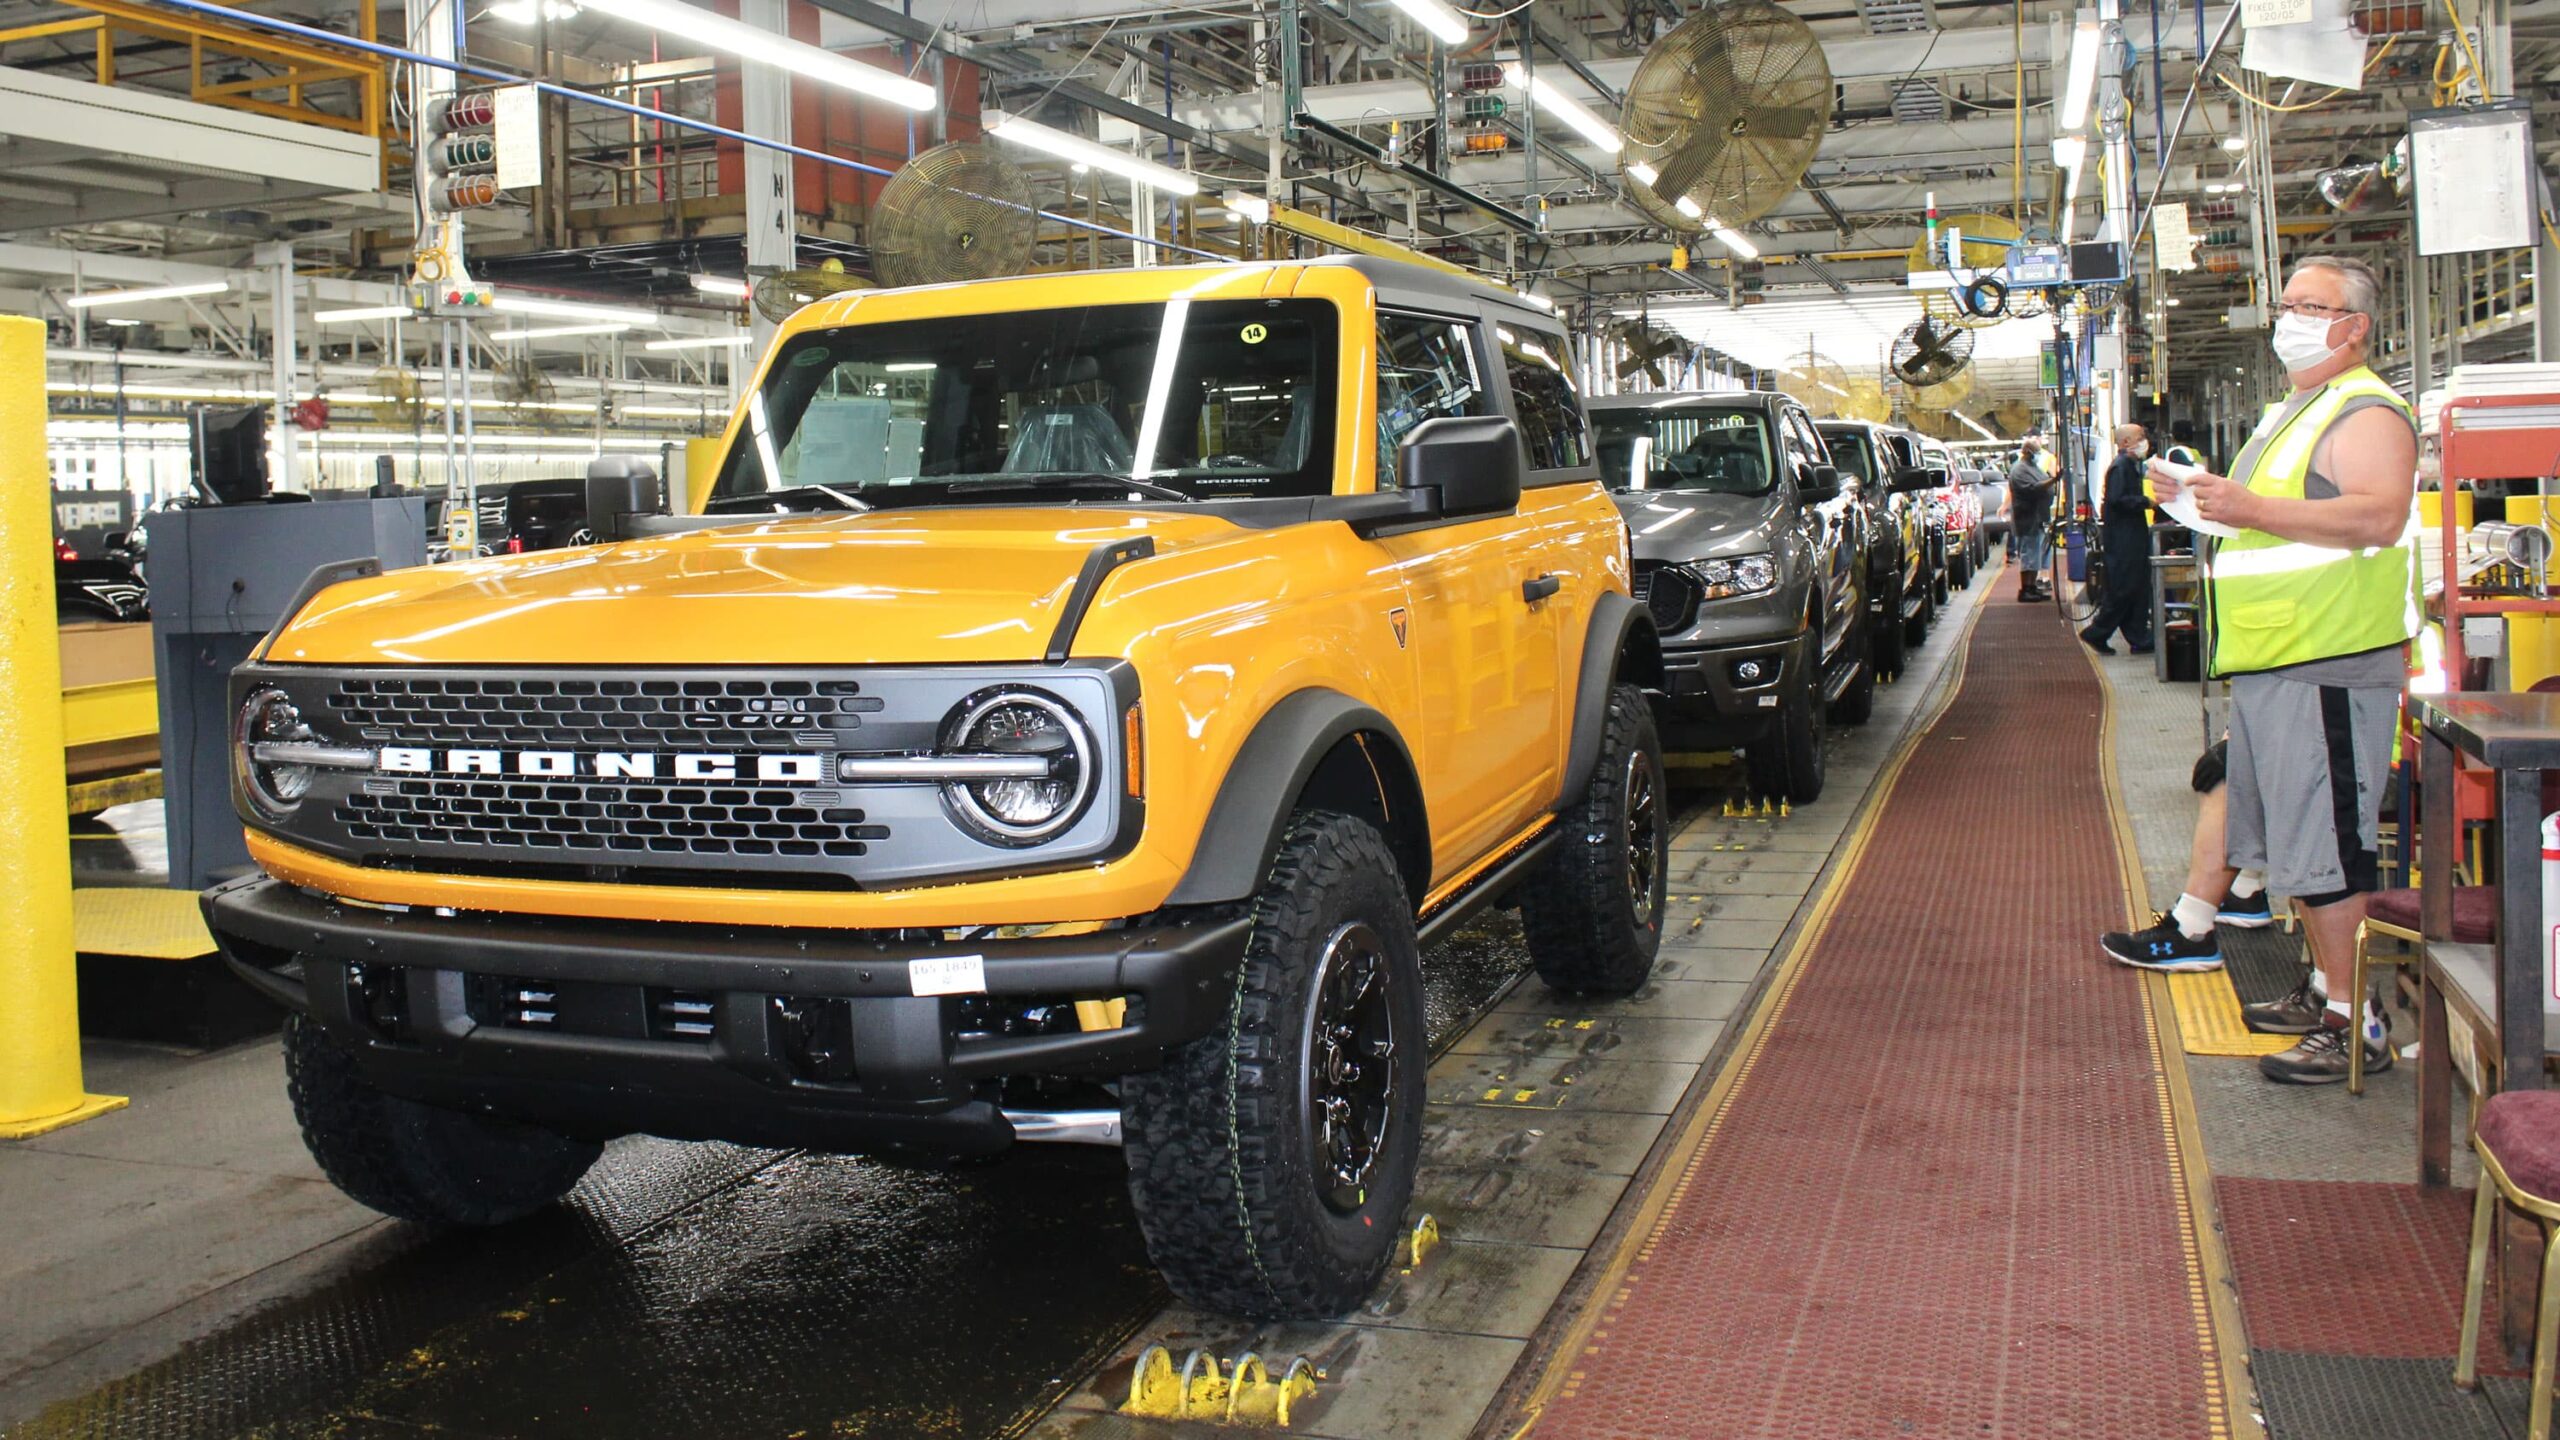 Ford’s June gross sales decline by 26.9% as firm misses Q2 expectations